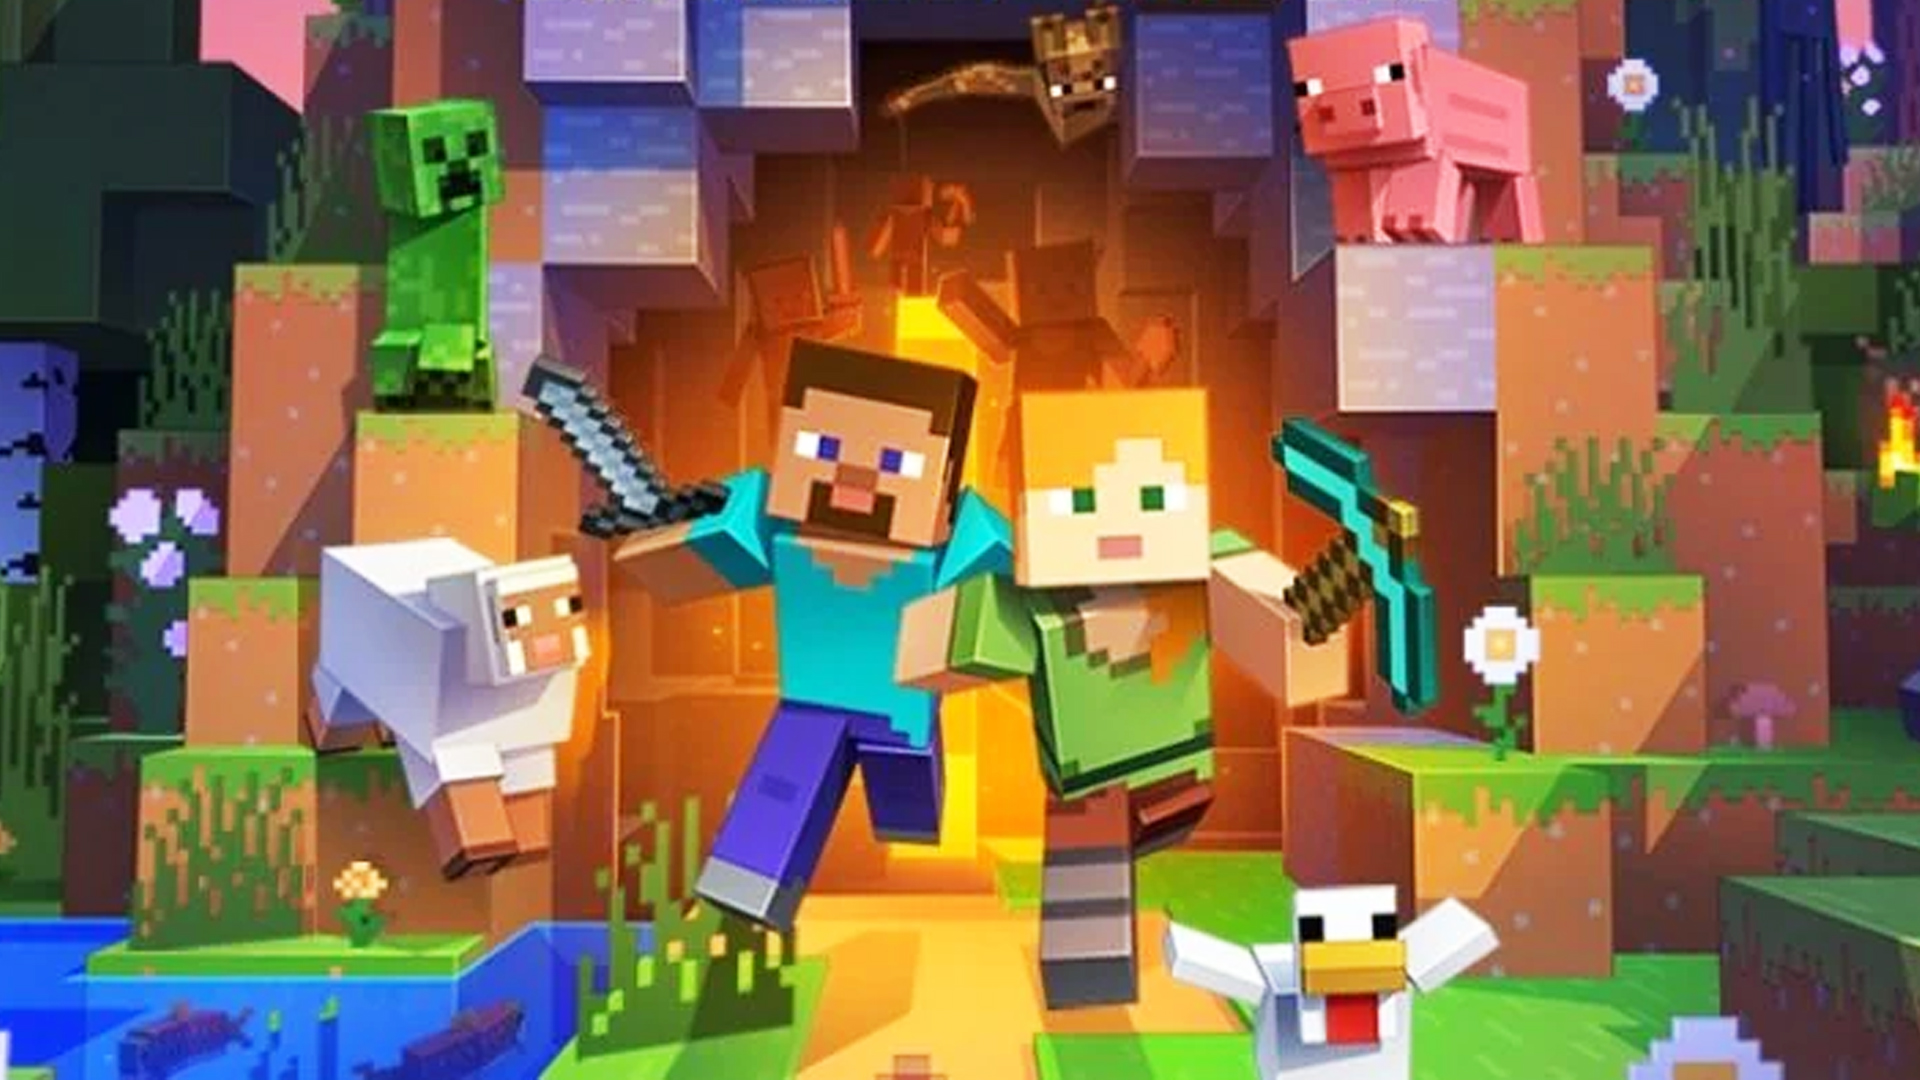 Minecraft Java and Bedrock editions are no more… separately